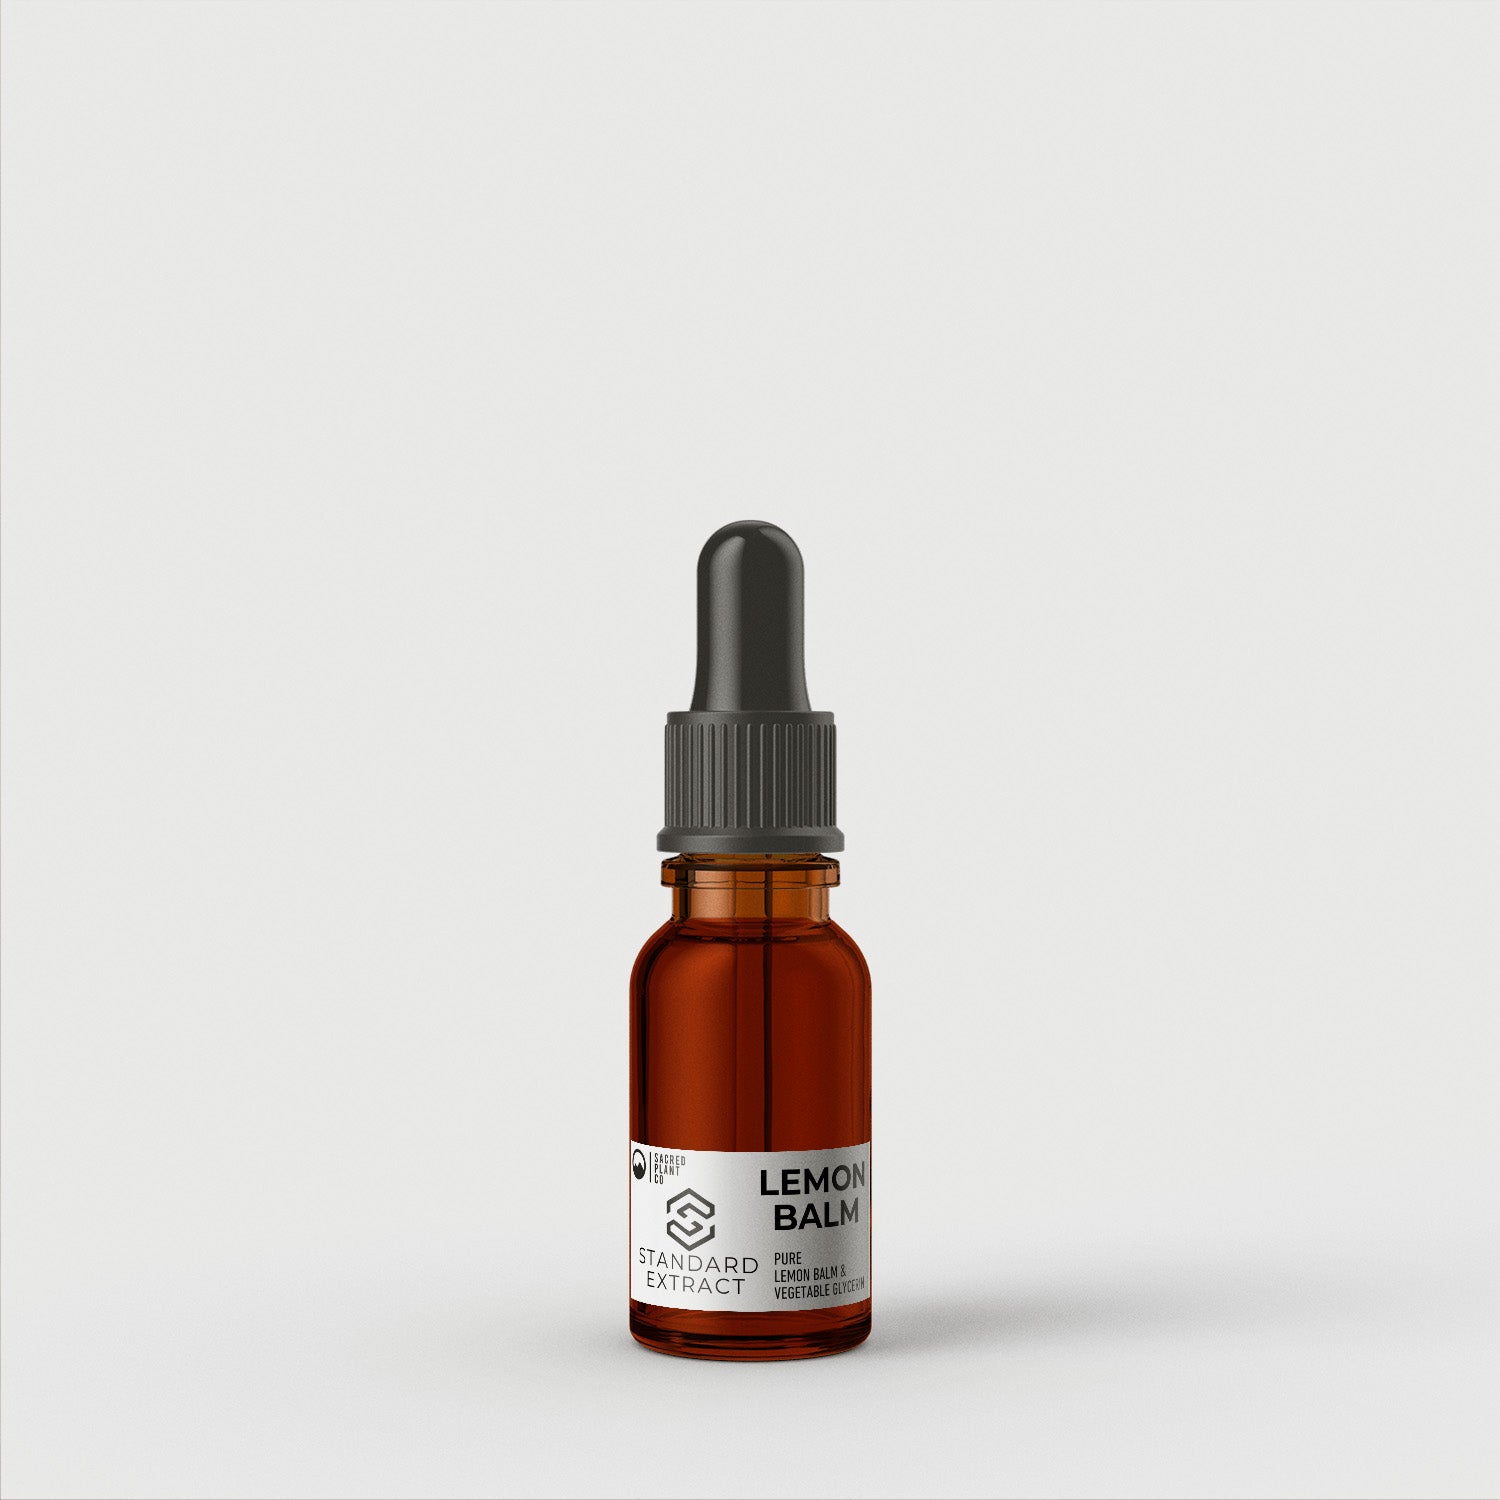 Compact and travel-friendly bottle of Sacred Plant Co Lemon Balm Tincture, &